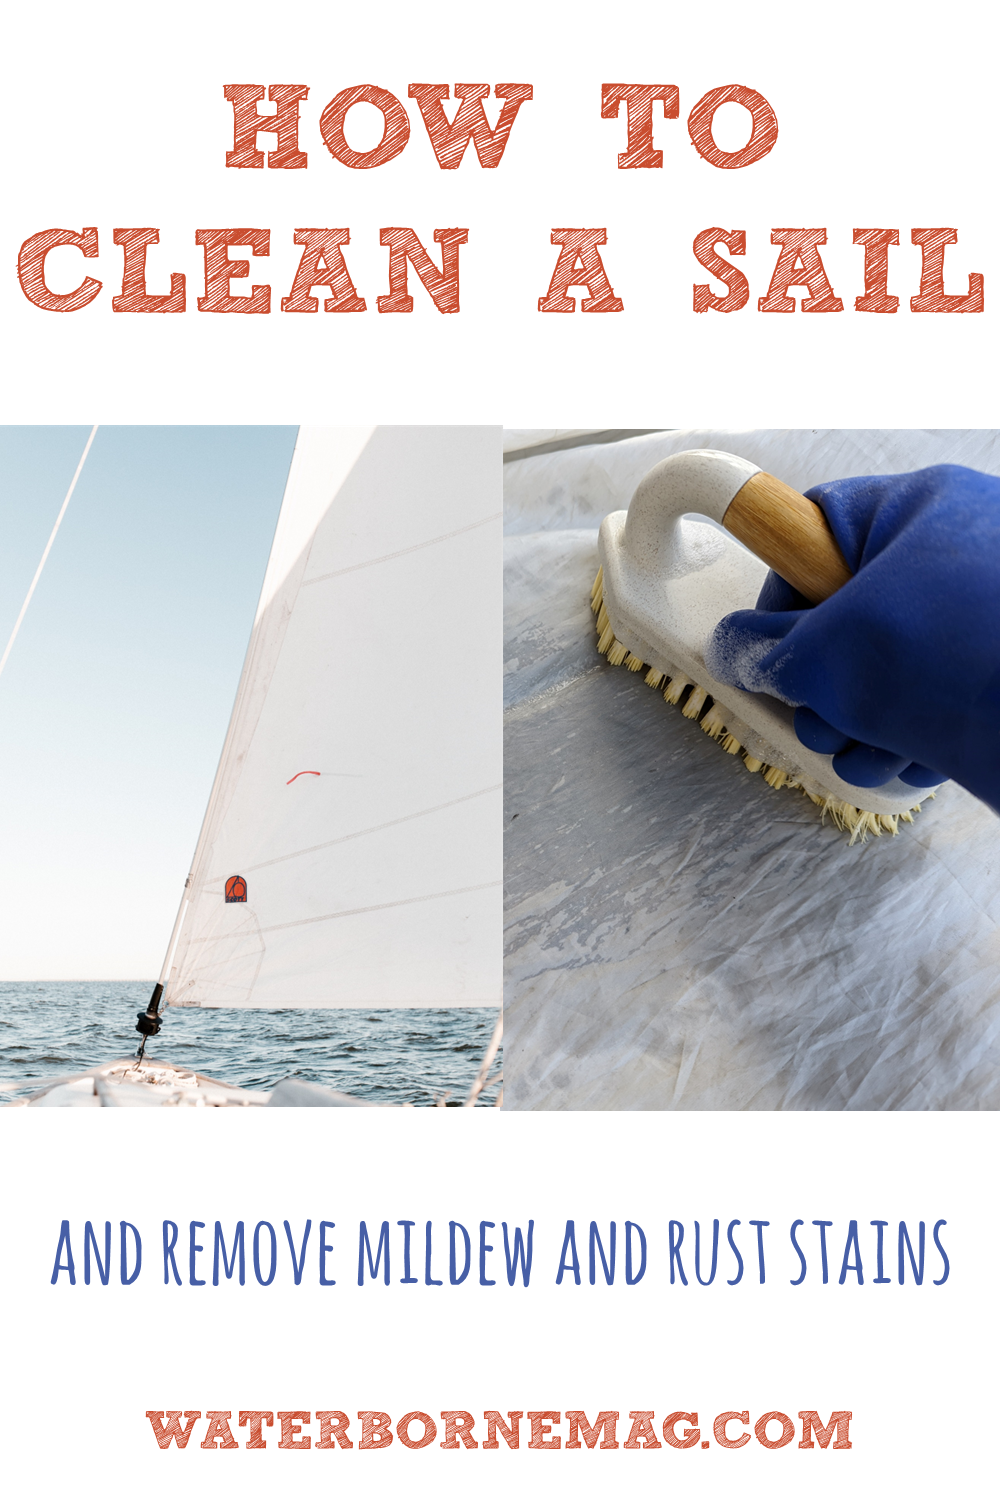 How To Clean Sails  